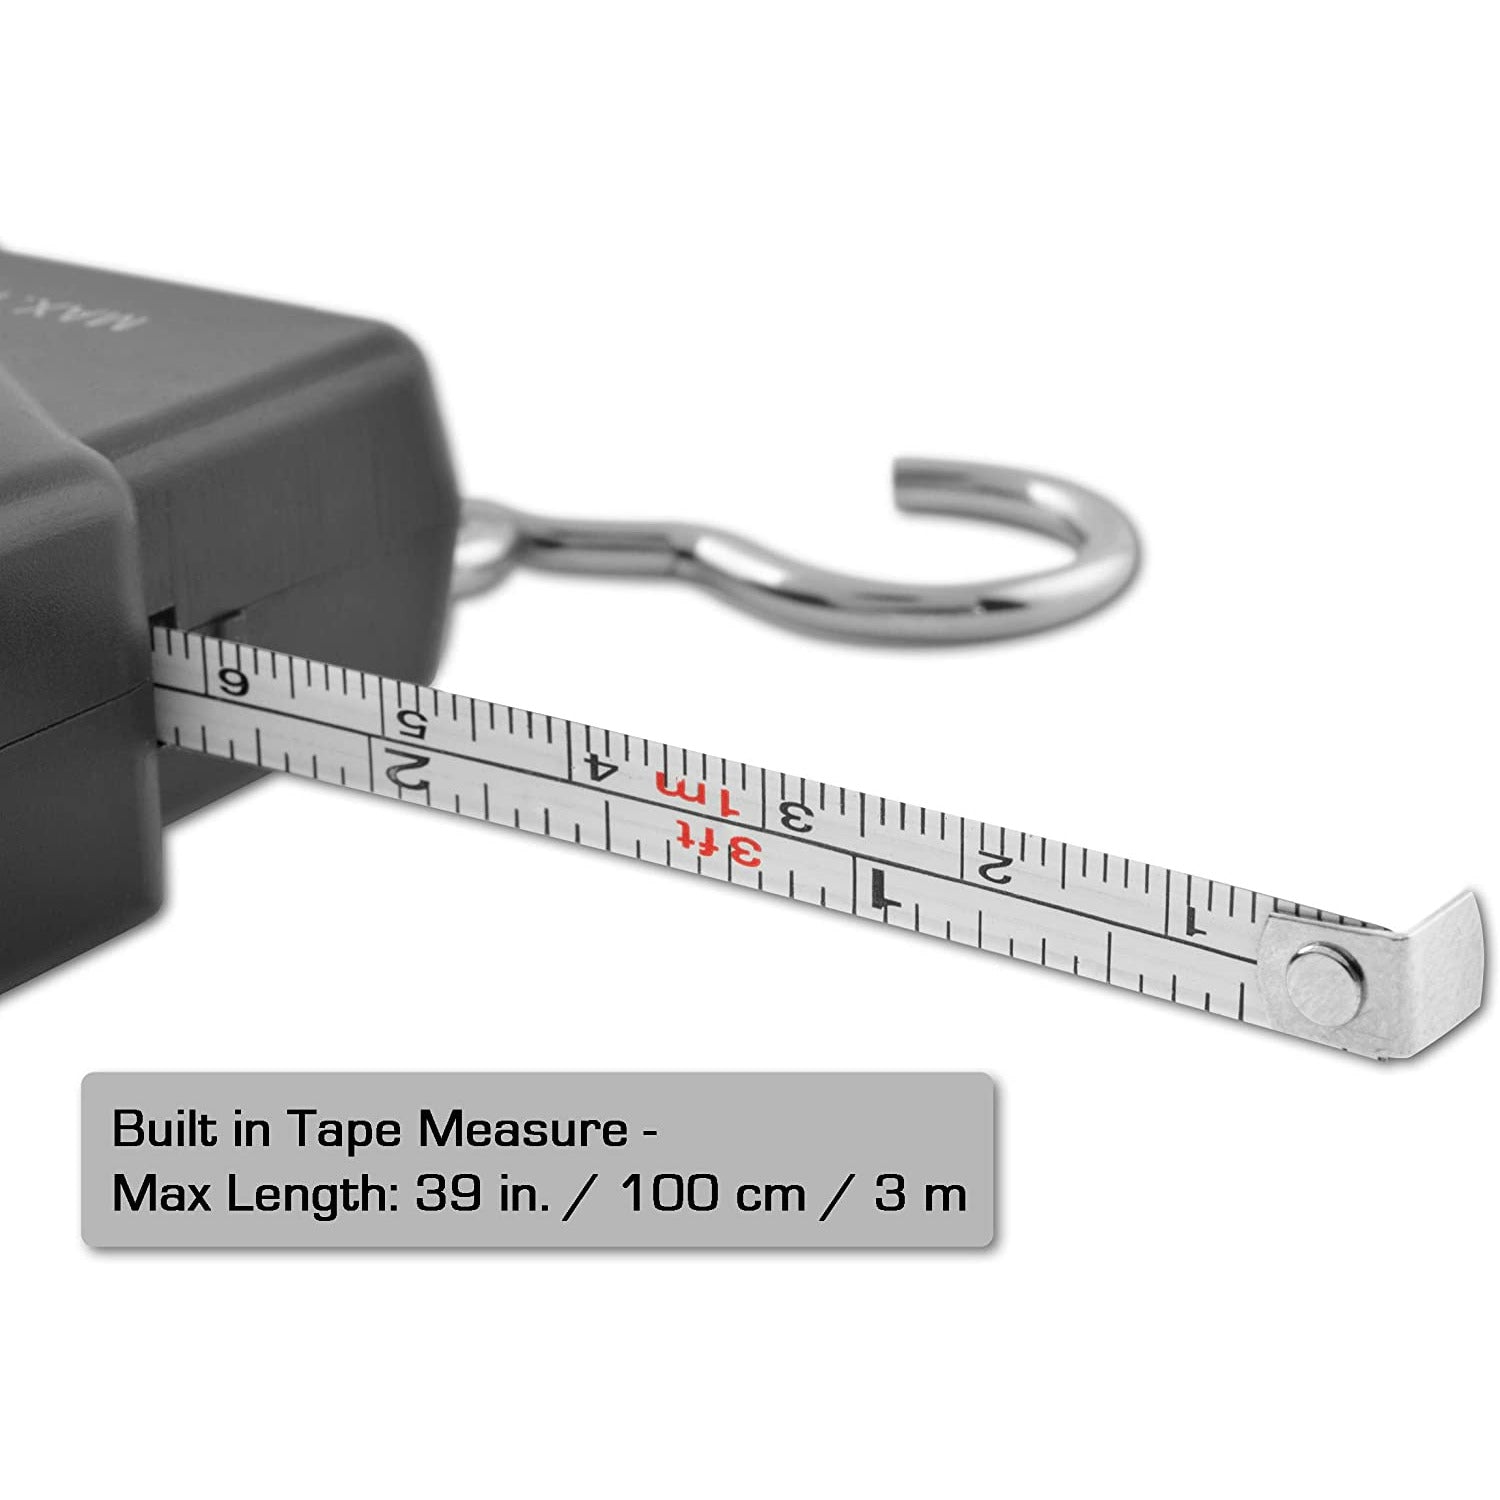 SOUTH BEND DIGITAL HANGING FISH SCALE W/ TAPE MEASURE 110 WEIGHT CAPACITY  - Copperstate Tackle